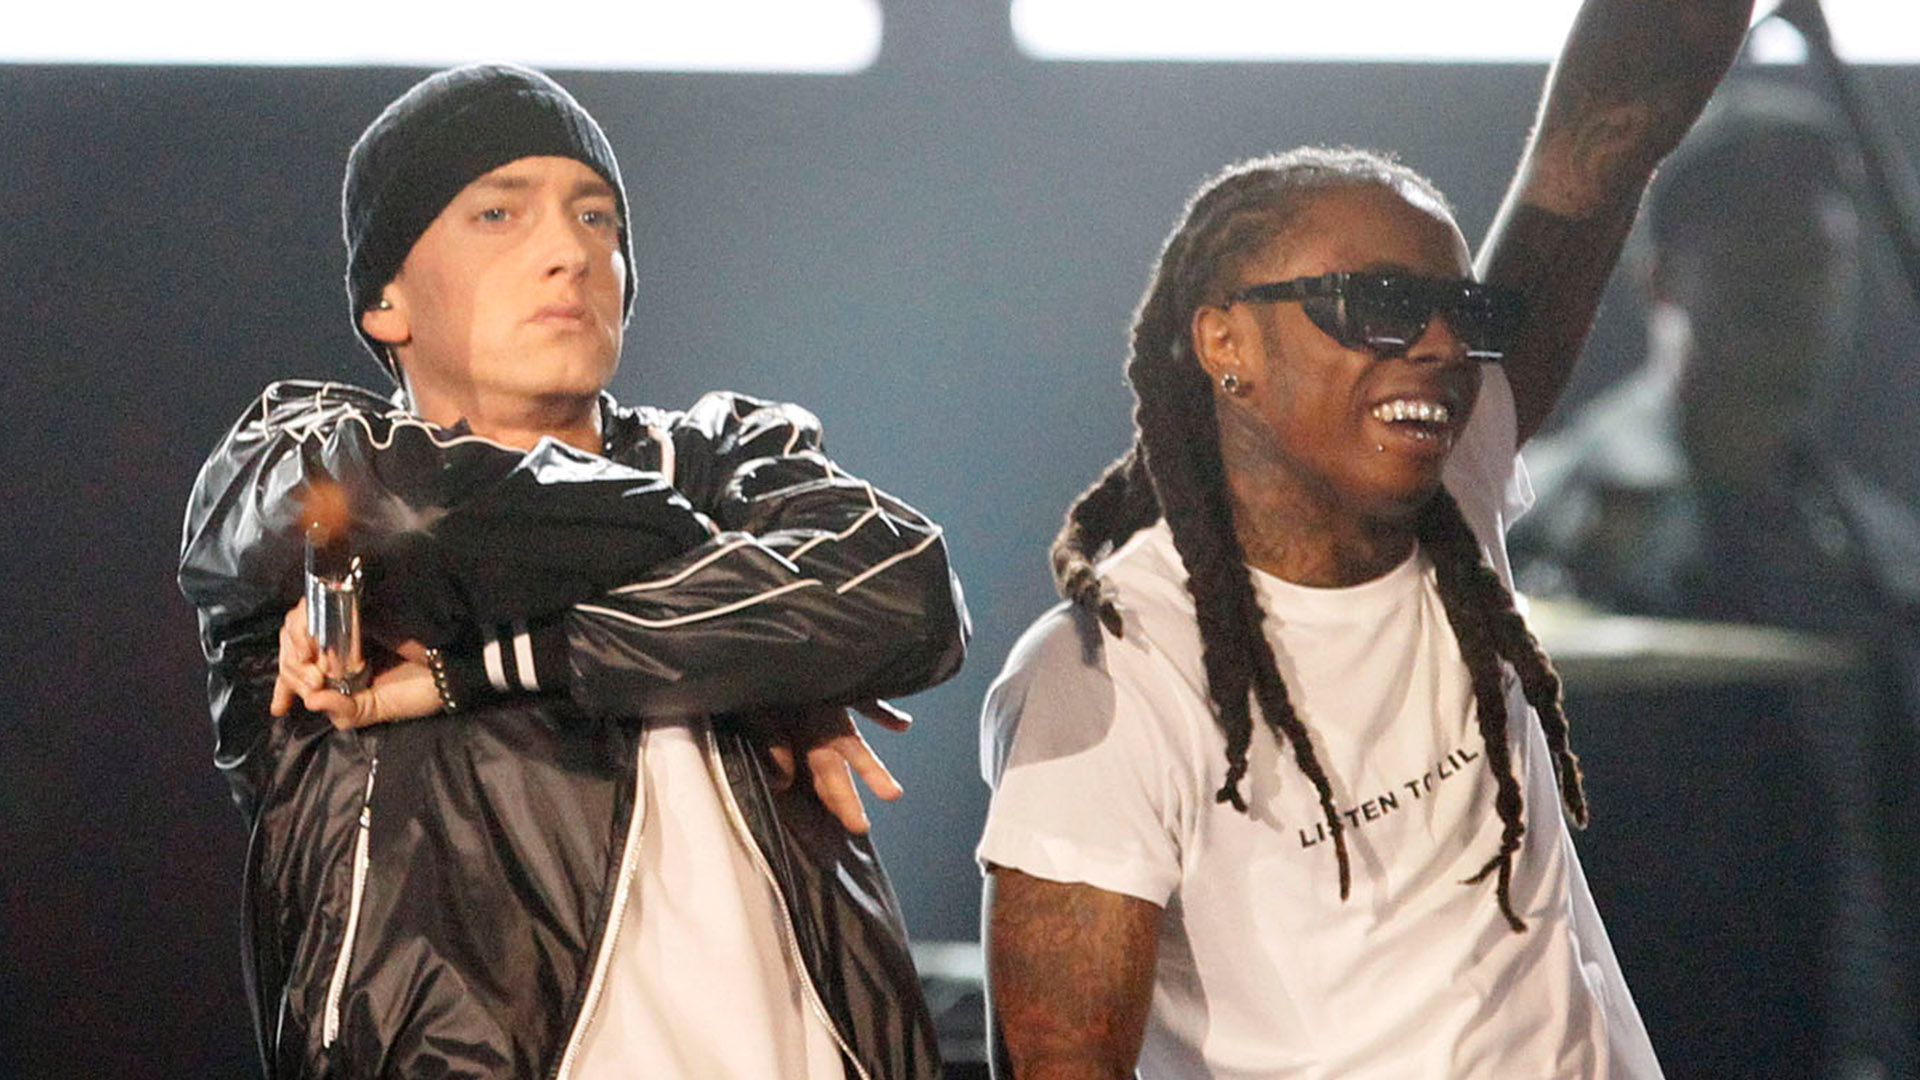 When You Get On That Joint With Eminem Its Like A Championship - HD Wallpaper 